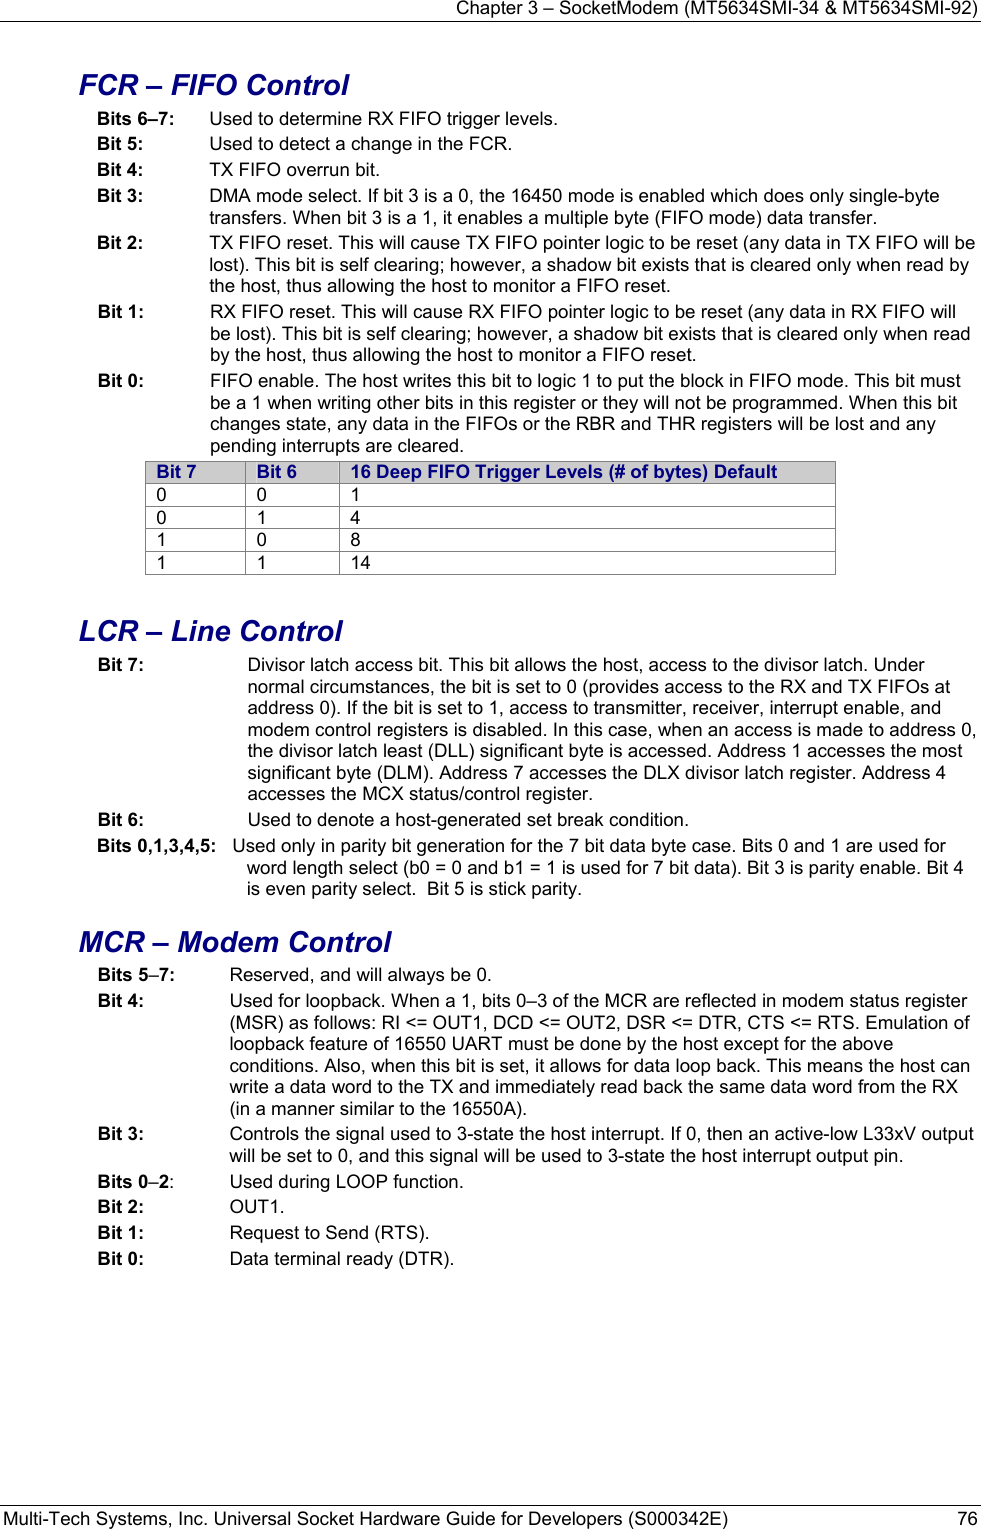 Chapter 3 – SocketModem (MT5634SMI-34 &amp; MT5634SMI-92) Multi-Tech Systems, Inc. Universal Socket Hardware Guide for Developers (S000342E)  76  FCR – FIFO Control Bits 6–7:  Used to determine RX FIFO trigger levels. Bit 5:  Used to detect a change in the FCR. Bit 4:   TX FIFO overrun bit. Bit 3:   DMA mode select. If bit 3 is a 0, the 16450 mode is enabled which does only single-byte transfers. When bit 3 is a 1, it enables a multiple byte (FIFO mode) data transfer. Bit 2:   TX FIFO reset. This will cause TX FIFO pointer logic to be reset (any data in TX FIFO will be lost). This bit is self clearing; however, a shadow bit exists that is cleared only when read by the host, thus allowing the host to monitor a FIFO reset. Bit 1:   RX FIFO reset. This will cause RX FIFO pointer logic to be reset (any data in RX FIFO will be lost). This bit is self clearing; however, a shadow bit exists that is cleared only when read by the host, thus allowing the host to monitor a FIFO reset. Bit 0:   FIFO enable. The host writes this bit to logic 1 to put the block in FIFO mode. This bit must be a 1 when writing other bits in this register or they will not be programmed. When this bit changes state, any data in the FIFOs or the RBR and THR registers will be lost and any pending interrupts are cleared. Bit 7  Bit 6  16 Deep FIFO Trigger Levels (# of bytes) Default 0 0 1 0 1 4 1 0 8 1 1 14  LCR – Line Control Bit 7:   Divisor latch access bit. This bit allows the host, access to the divisor latch. Under normal circumstances, the bit is set to 0 (provides access to the RX and TX FIFOs at address 0). If the bit is set to 1, access to transmitter, receiver, interrupt enable, and modem control registers is disabled. In this case, when an access is made to address 0, the divisor latch least (DLL) significant byte is accessed. Address 1 accesses the most significant byte (DLM). Address 7 accesses the DLX divisor latch register. Address 4 accesses the MCX status/control register. Bit 6:   Used to denote a host-generated set break condition. Bits 0,1,3,4,5:   Used only in parity bit generation for the 7 bit data byte case. Bits 0 and 1 are used for word length select (b0 = 0 and b1 = 1 is used for 7 bit data). Bit 3 is parity enable. Bit 4 is even parity select.  Bit 5 is stick parity. MCR – Modem Control Bits 5–7:  Reserved, and will always be 0. Bit 4:   Used for loopback. When a 1, bits 0–3 of the MCR are reflected in modem status register (MSR) as follows: RI &lt;= OUT1, DCD &lt;= OUT2, DSR &lt;= DTR, CTS &lt;= RTS. Emulation of loopback feature of 16550 UART must be done by the host except for the above conditions. Also, when this bit is set, it allows for data loop back. This means the host can write a data word to the TX and immediately read back the same data word from the RX (in a manner similar to the 16550A). Bit 3:   Controls the signal used to 3-state the host interrupt. If 0, then an active-low L33xV output will be set to 0, and this signal will be used to 3-state the host interrupt output pin. Bits 0–2:  Used during LOOP function. Bit 2:  OUT1. Bit 1:   Request to Send (RTS). Bit 0:   Data terminal ready (DTR). 